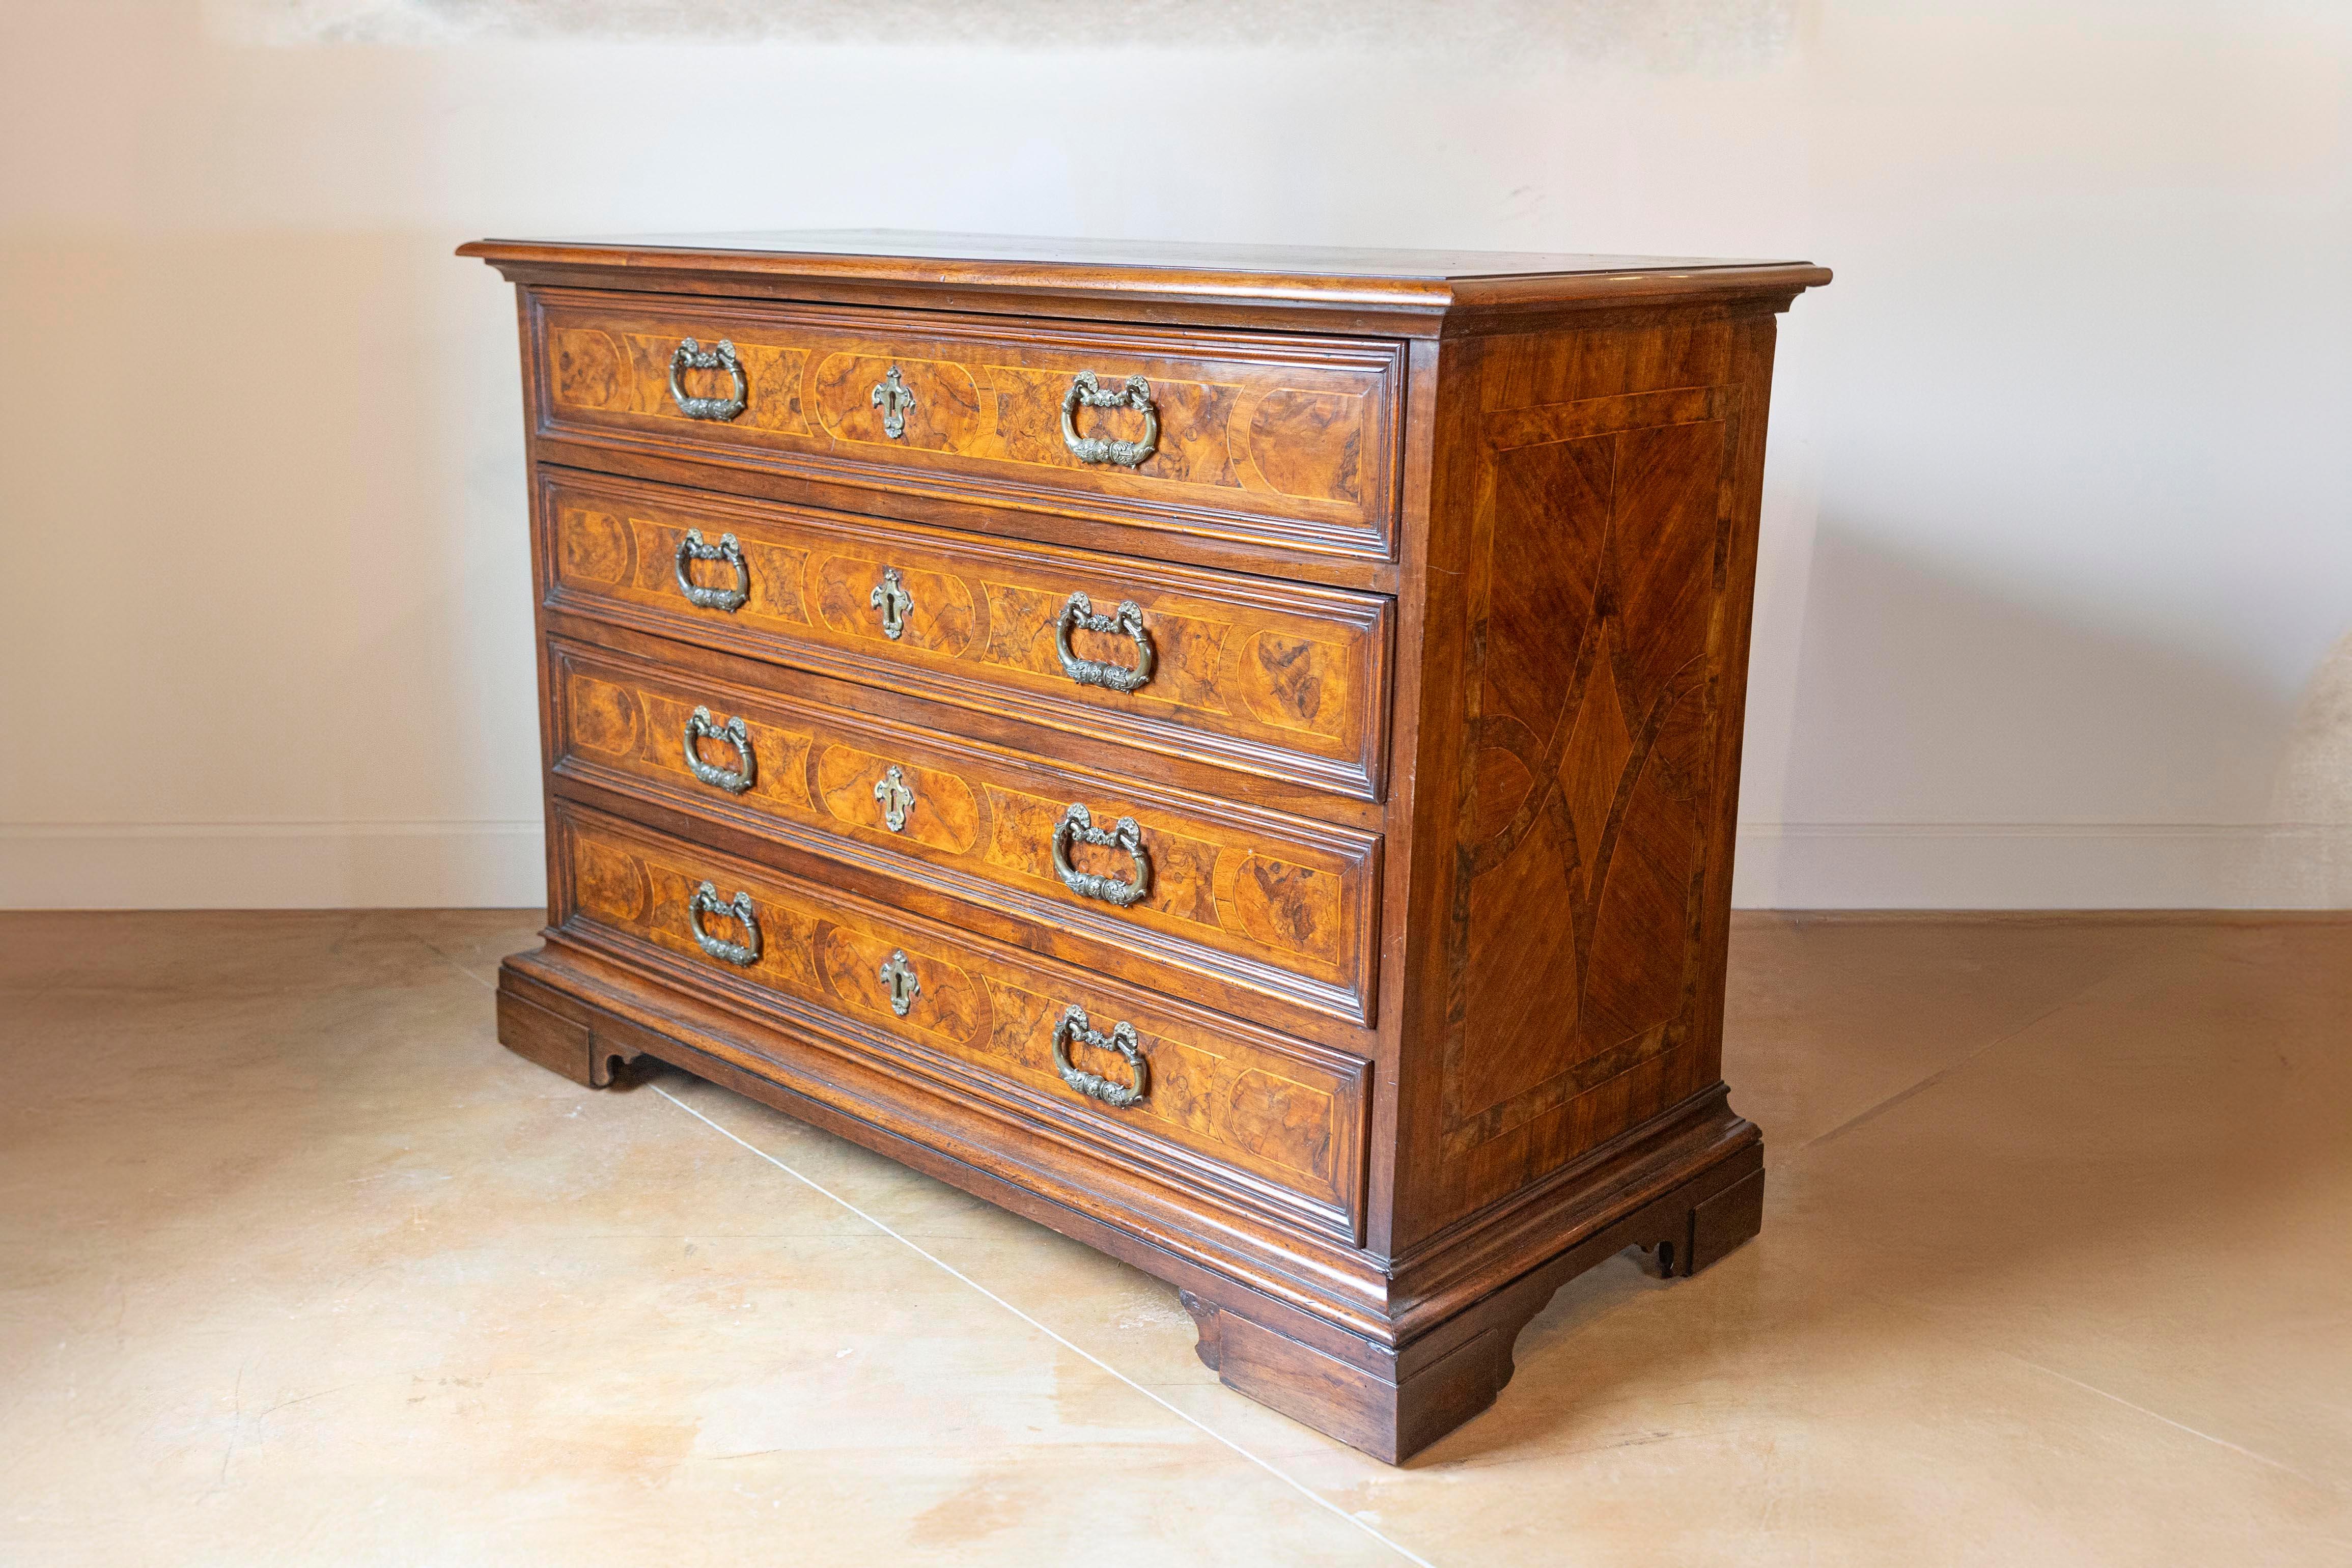 Carved 18th Century Italian Walnut Commode with Four Drawers and Ornate Hardware For Sale